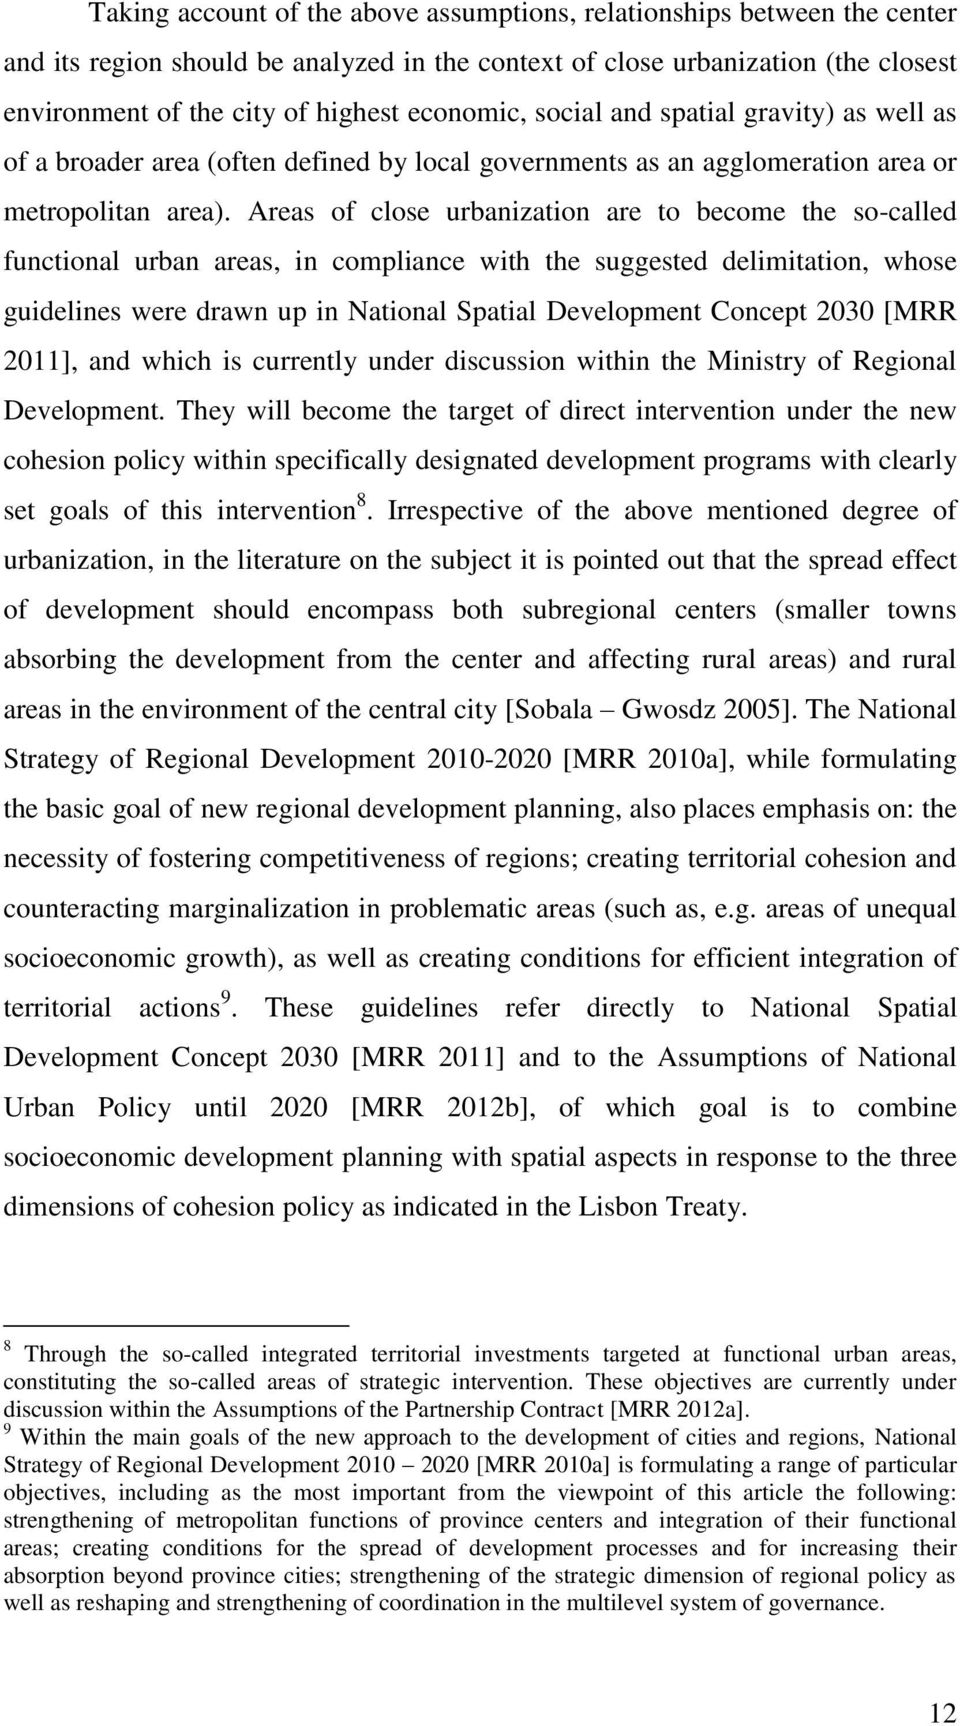 Areas of close urbanization are to become the so-called functional urban areas, in compliance with the suggested delimitation, whose guidelines were drawn up in National Spatial Development Concept